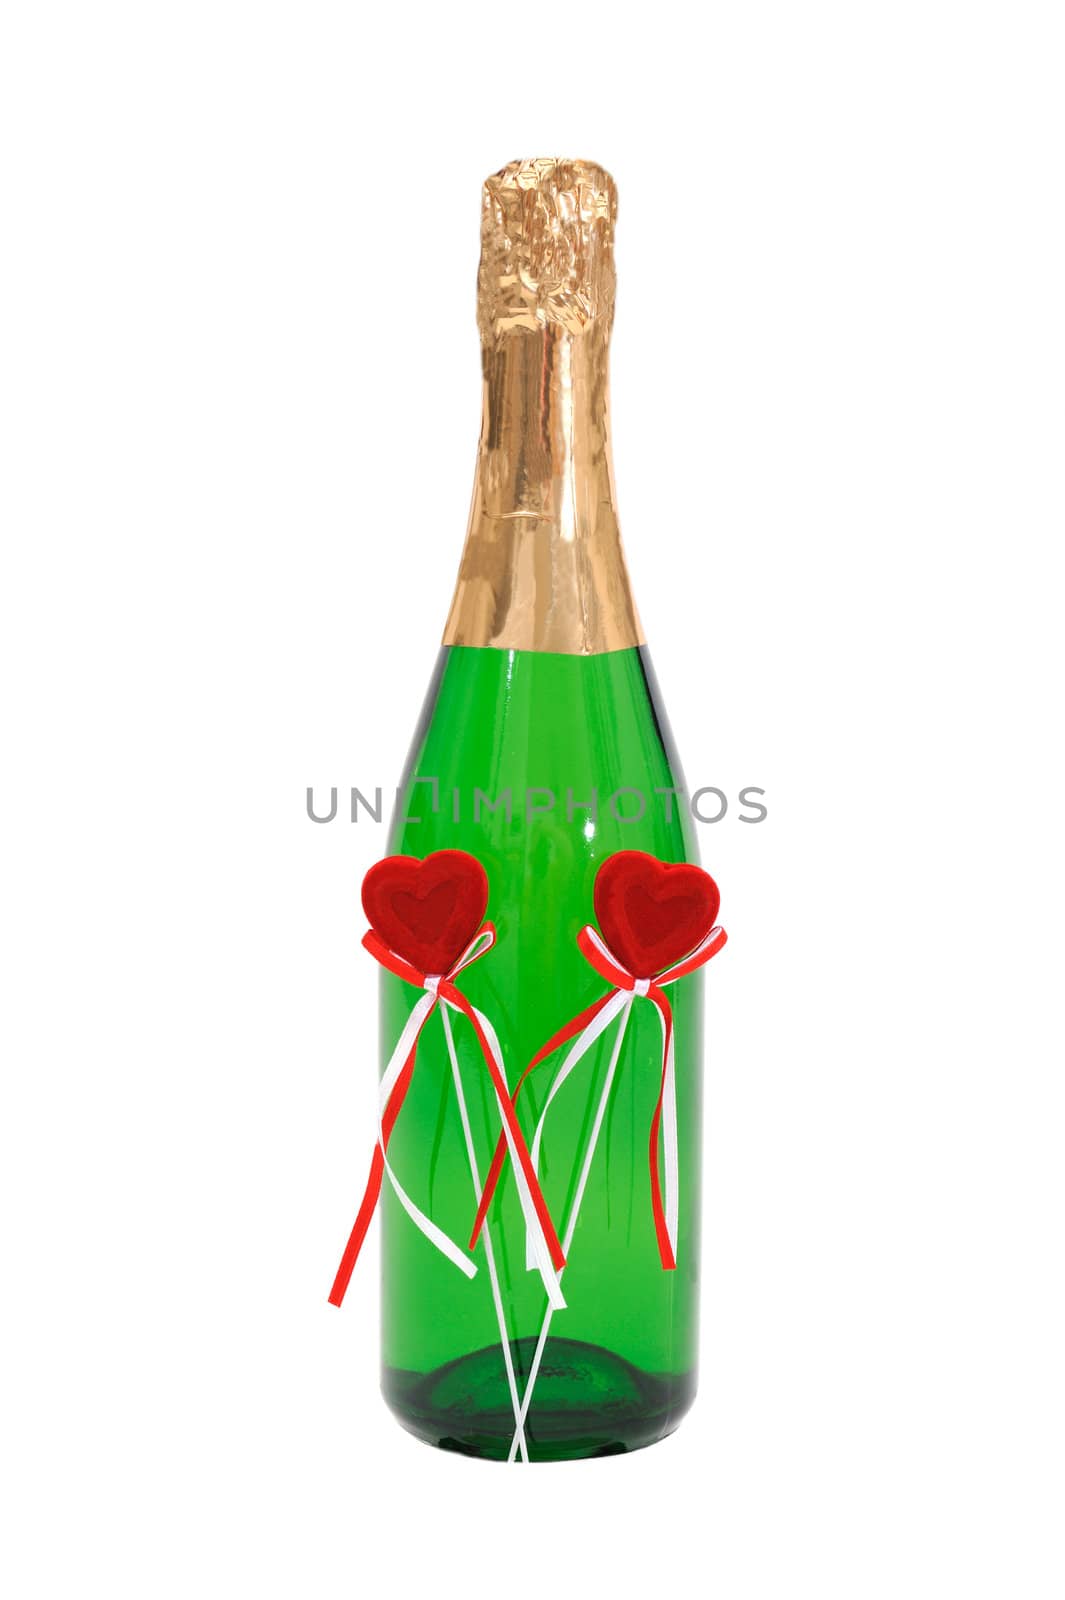 Bottle effervescent wine with two plush red hearts by DrVIB